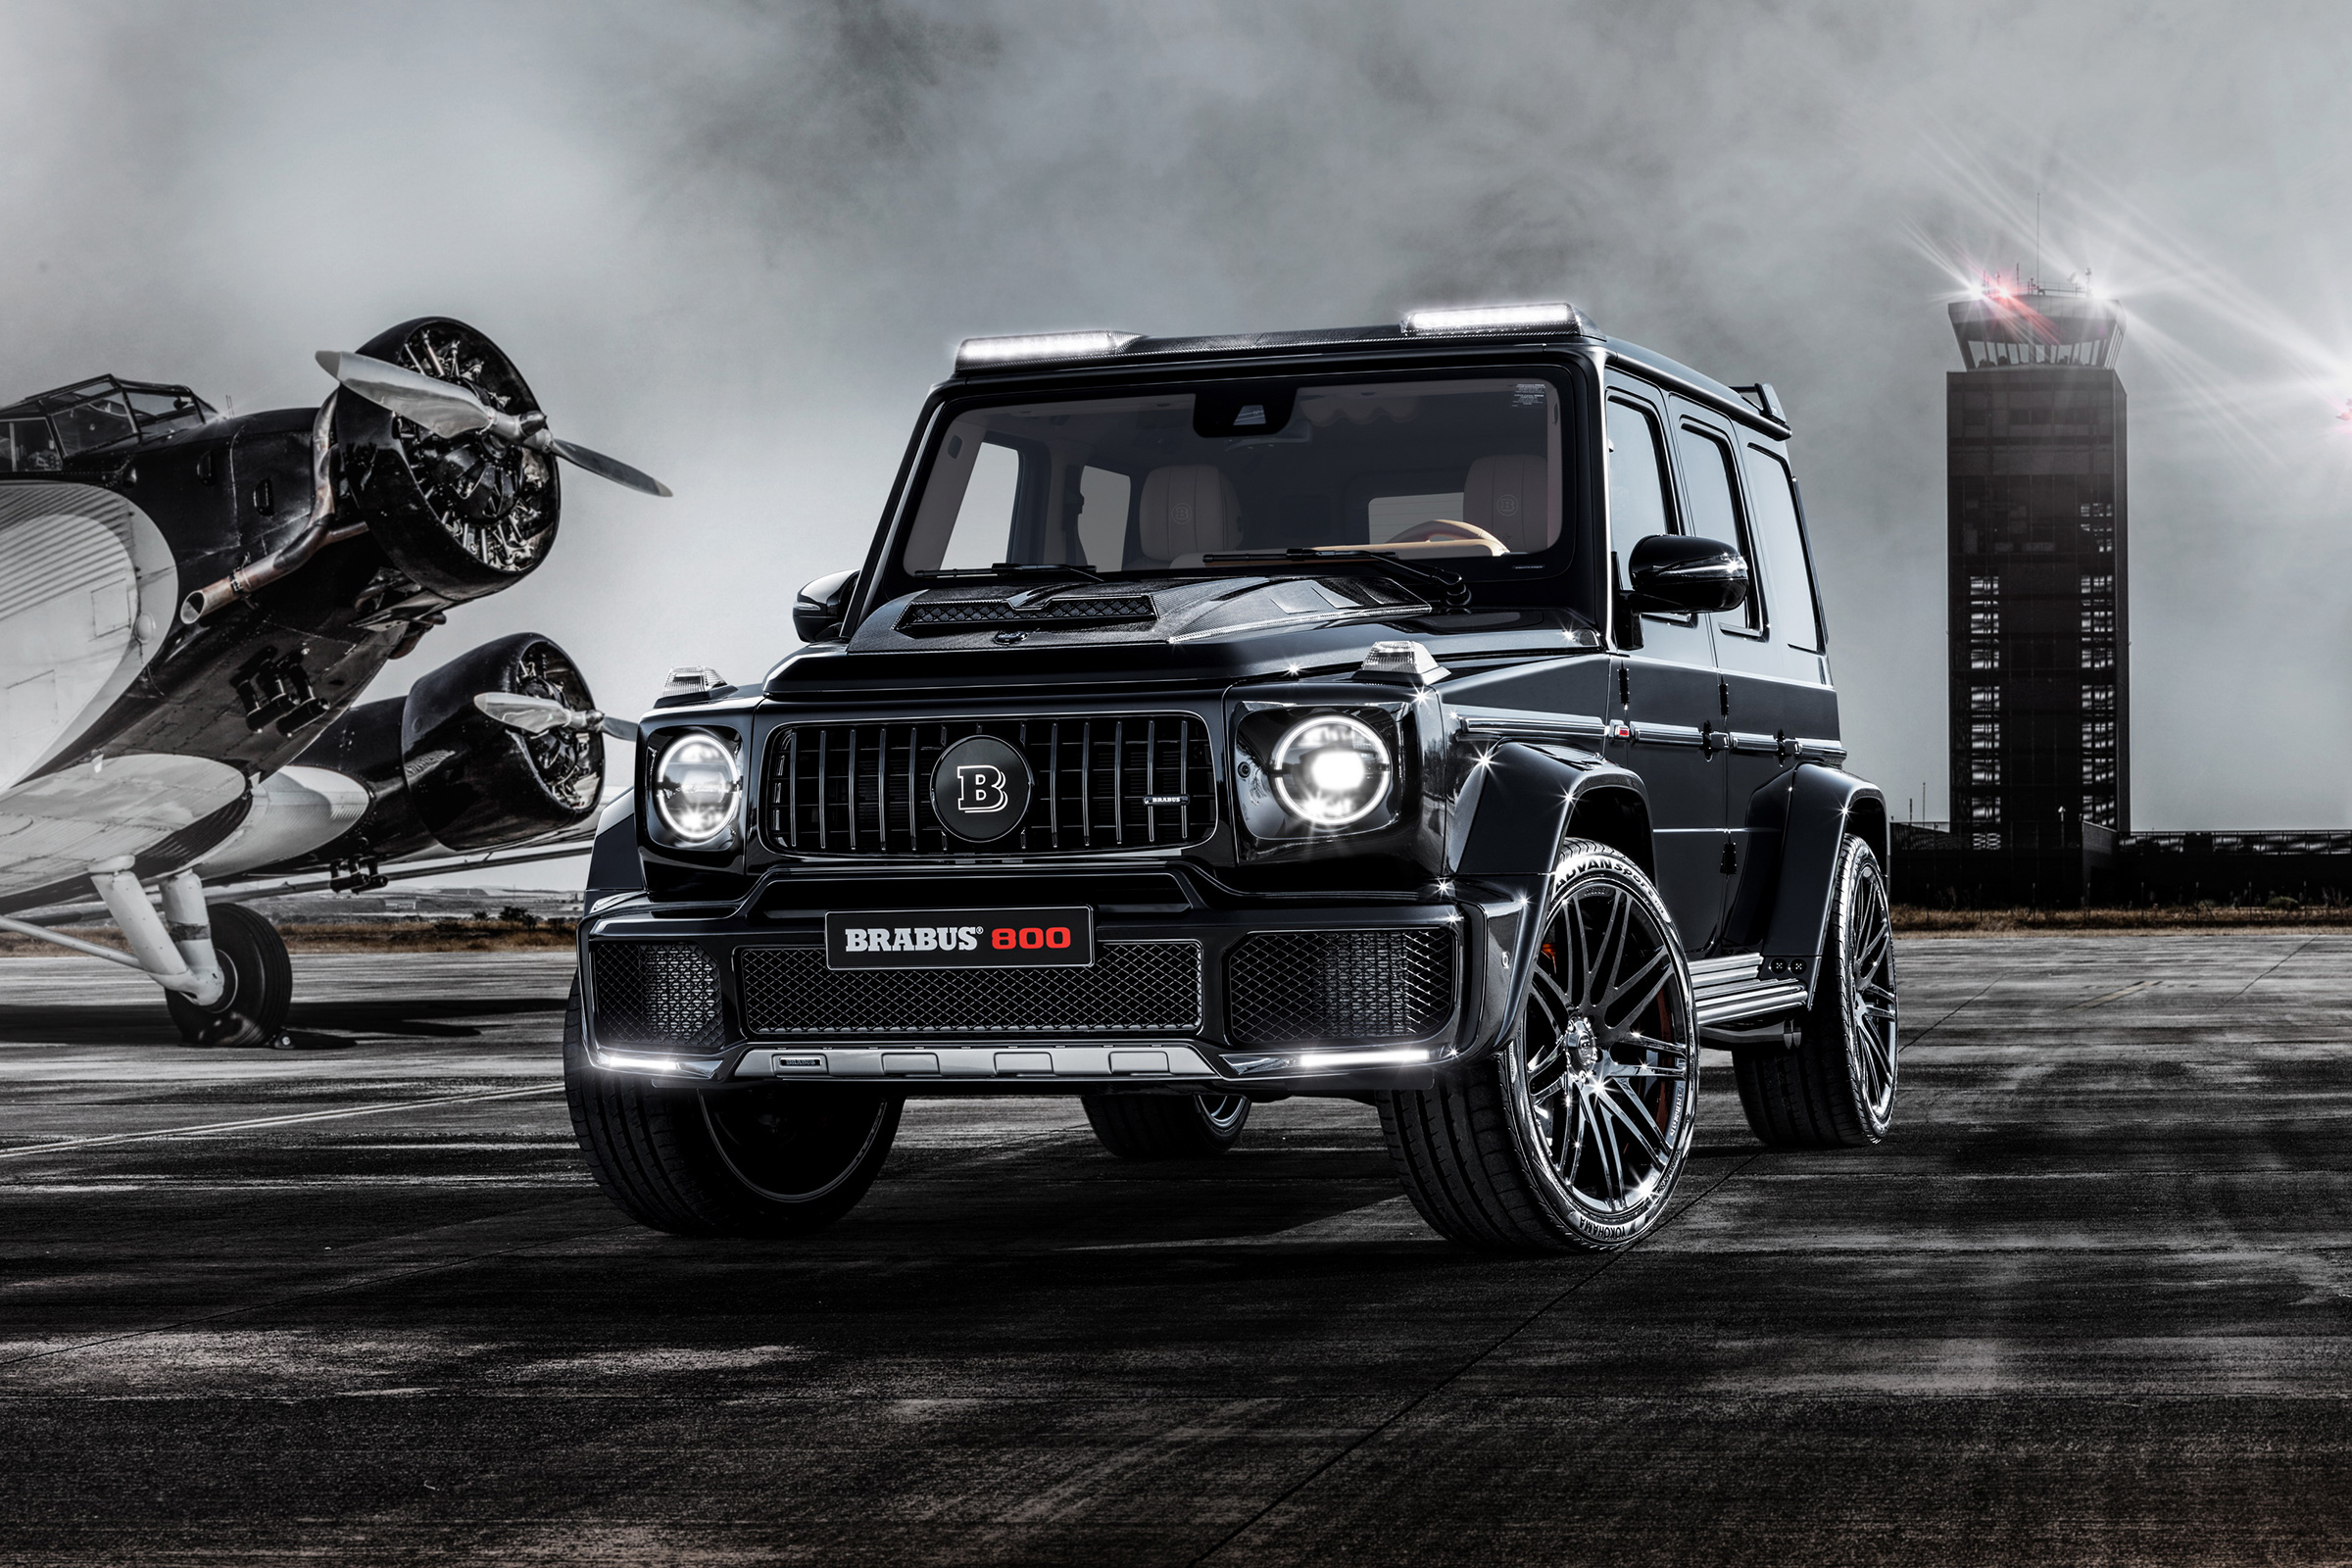 Brabus Takes Mercedes Amg G63 To 789bhp With 800 Widestar Evo